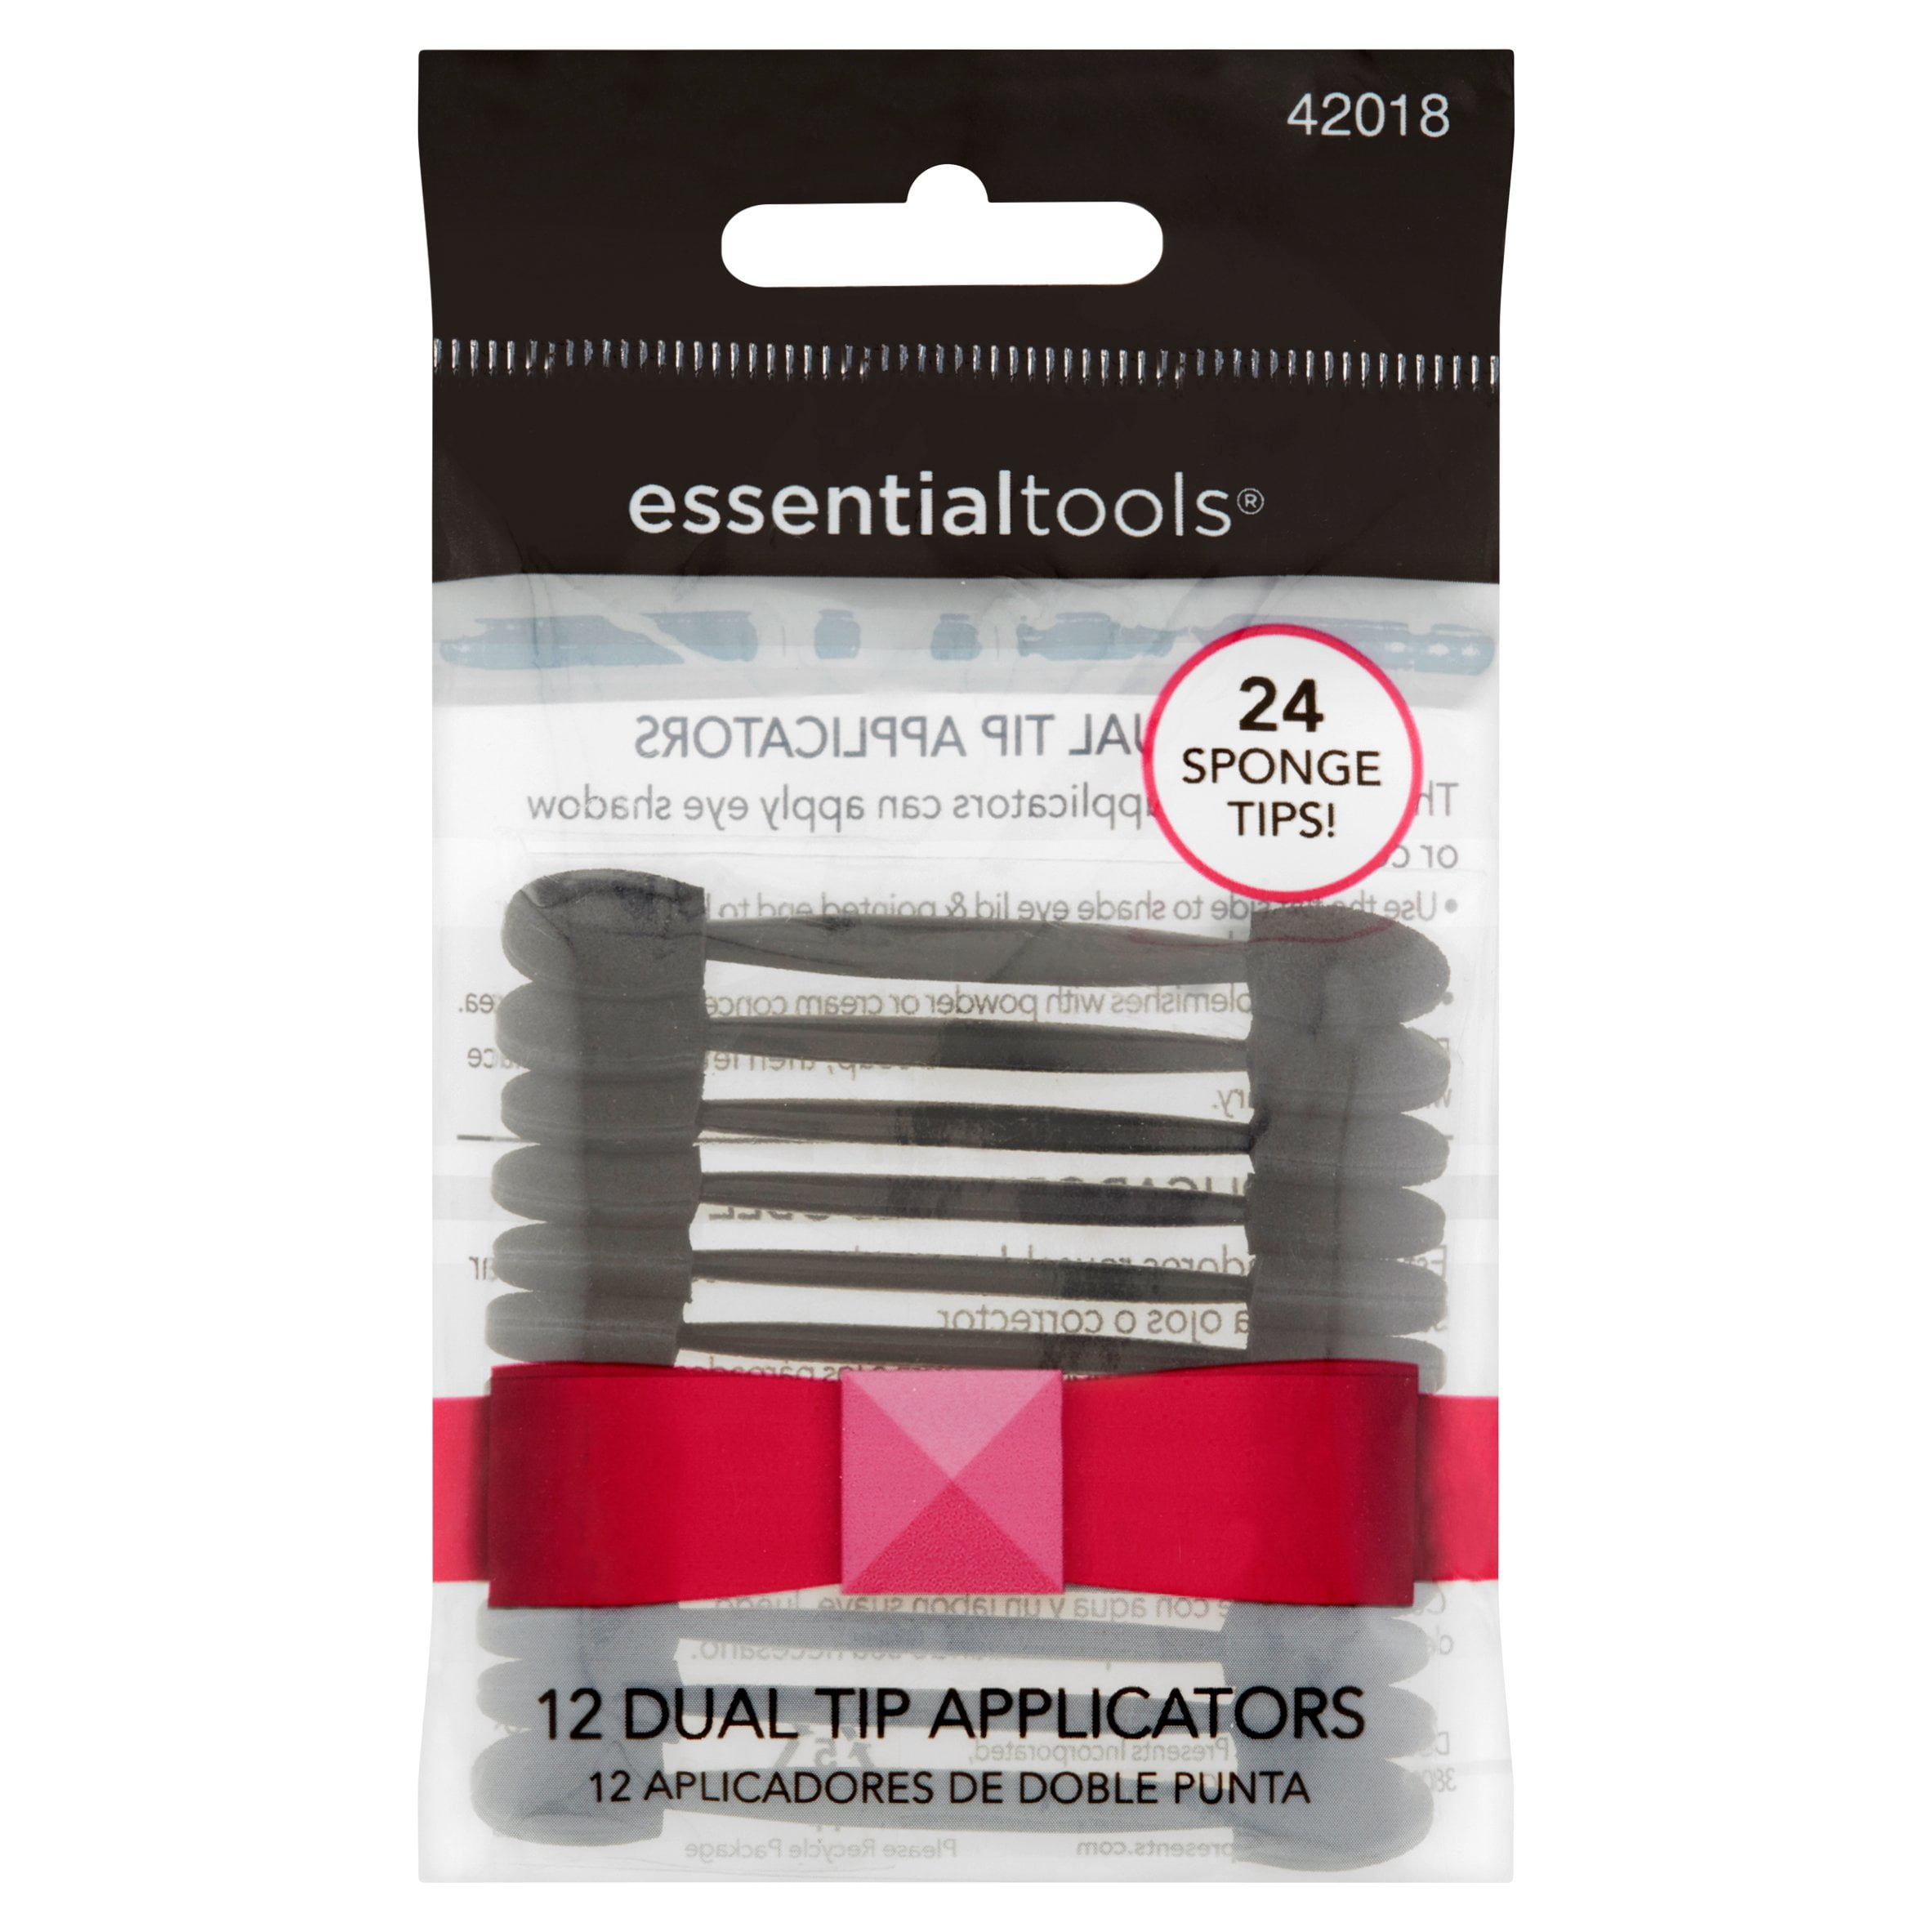 Sili Micro Glue Brush Applicator 3 Pack with Fine Tip Chiseled Tip and Flat Tapered Tip Dual Profile Glue Brushes